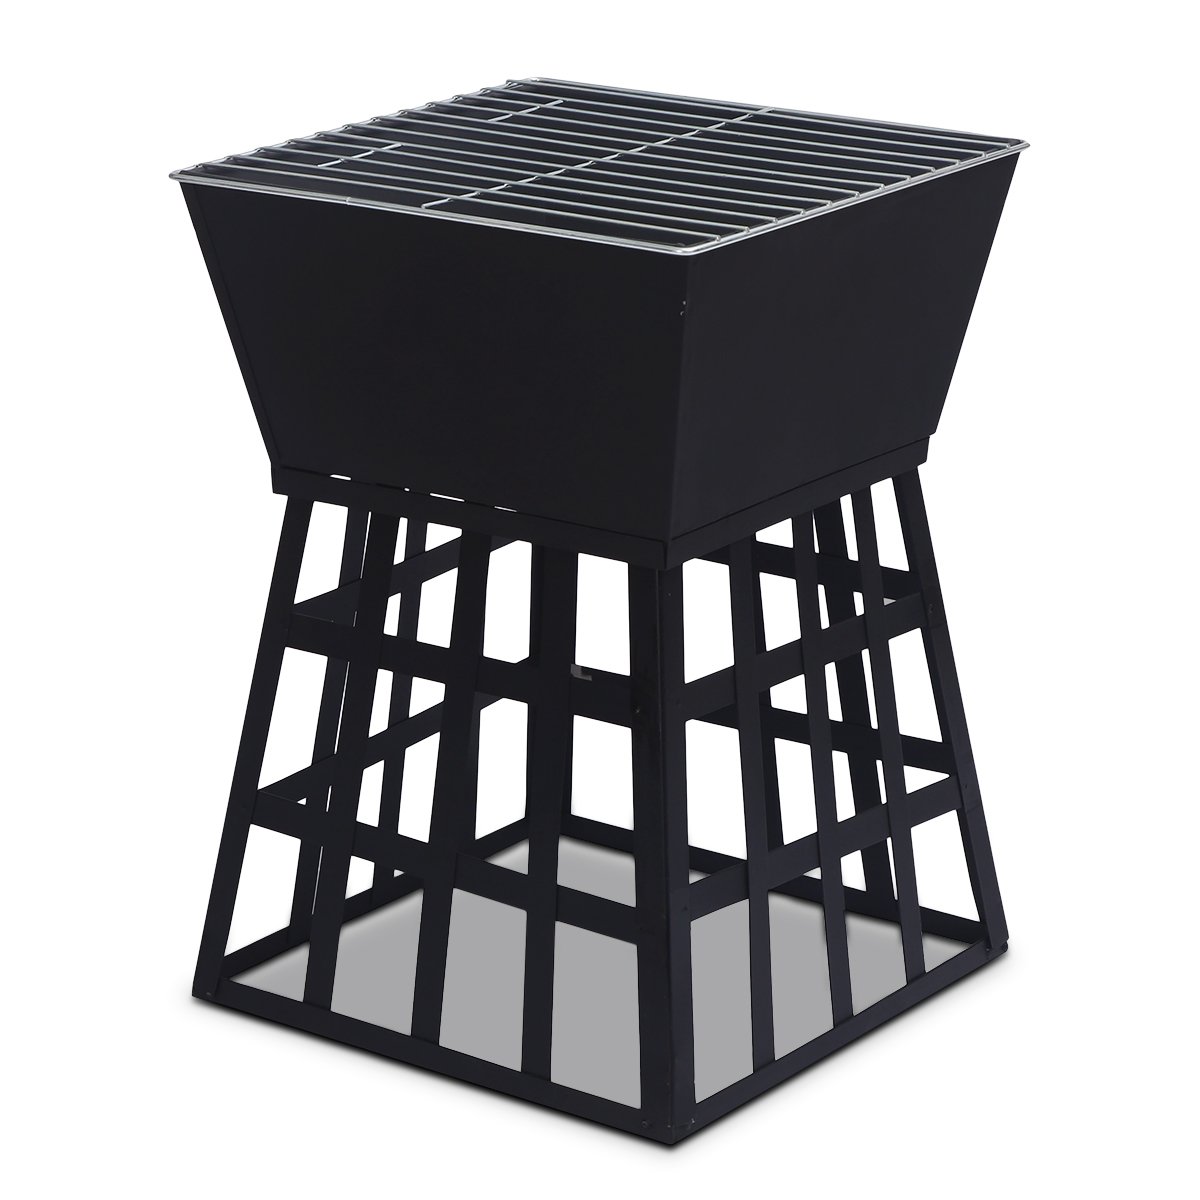 Wallaroo Outdoor Fire Pit for BBQ, Grilling, Cooking, Camping- Portable Brazier with Reversible Stand for Backyard